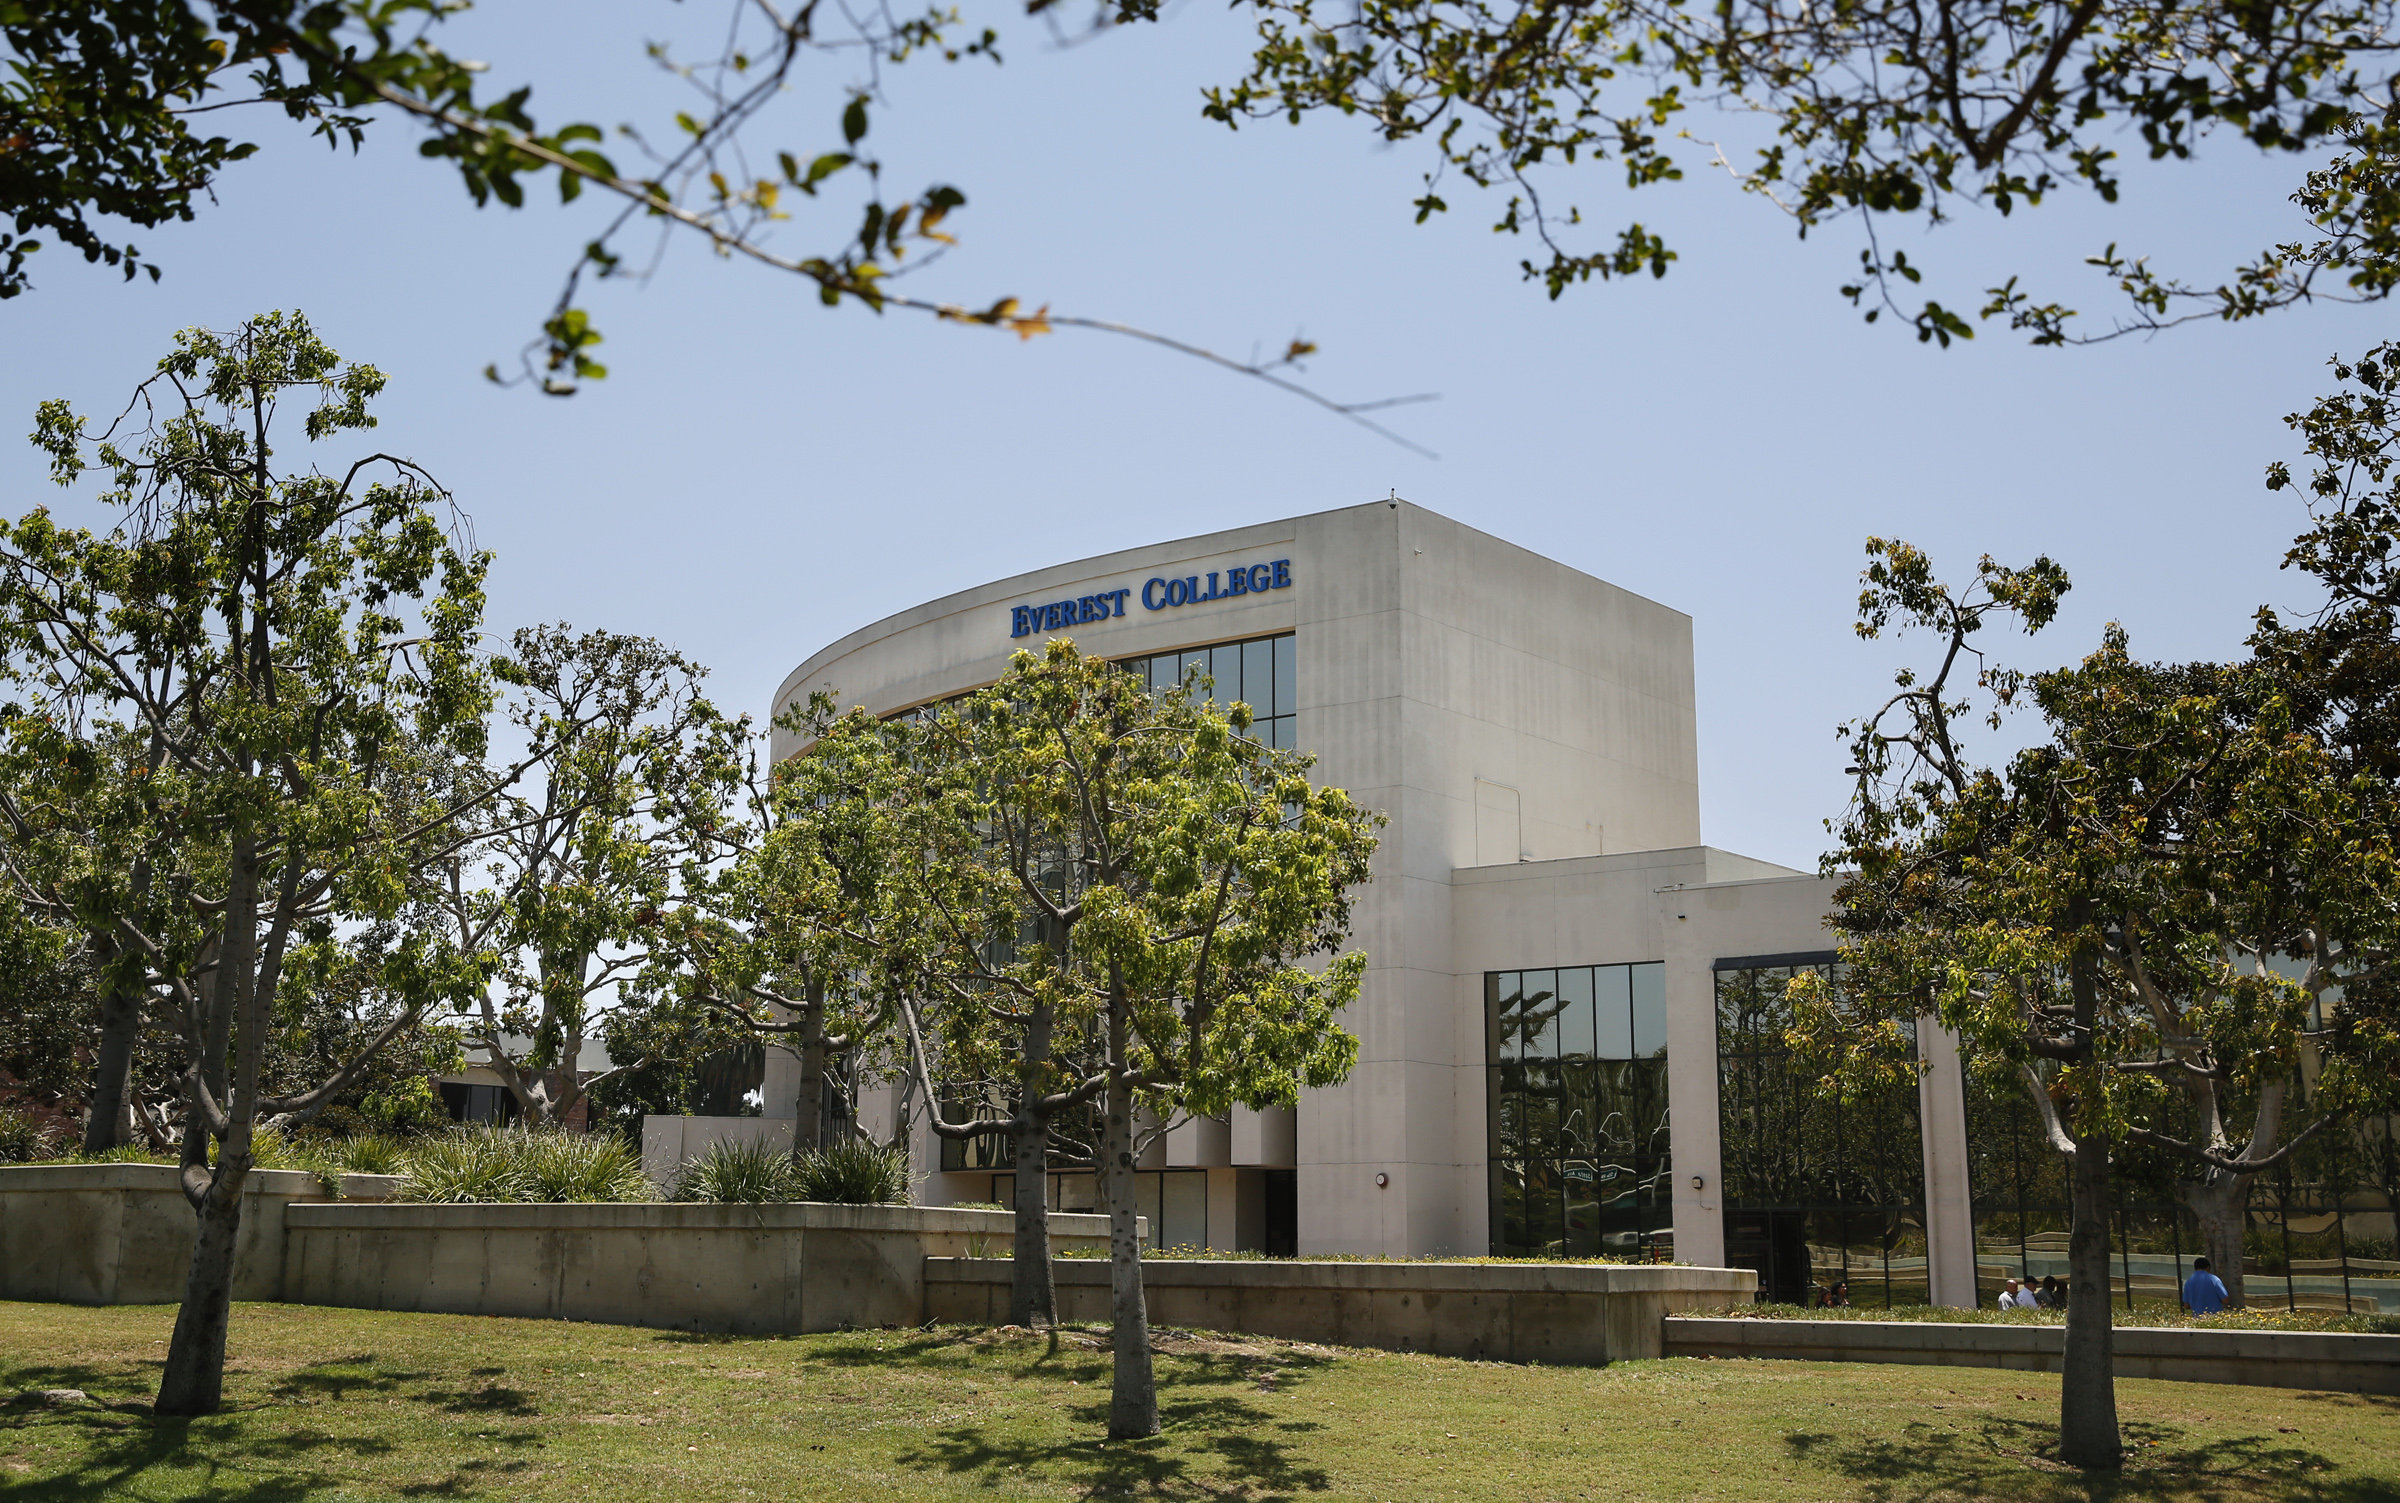 Everest College was part of Corinthian Colleges, a for-profit trade colleges that was forced into bankruptcy.